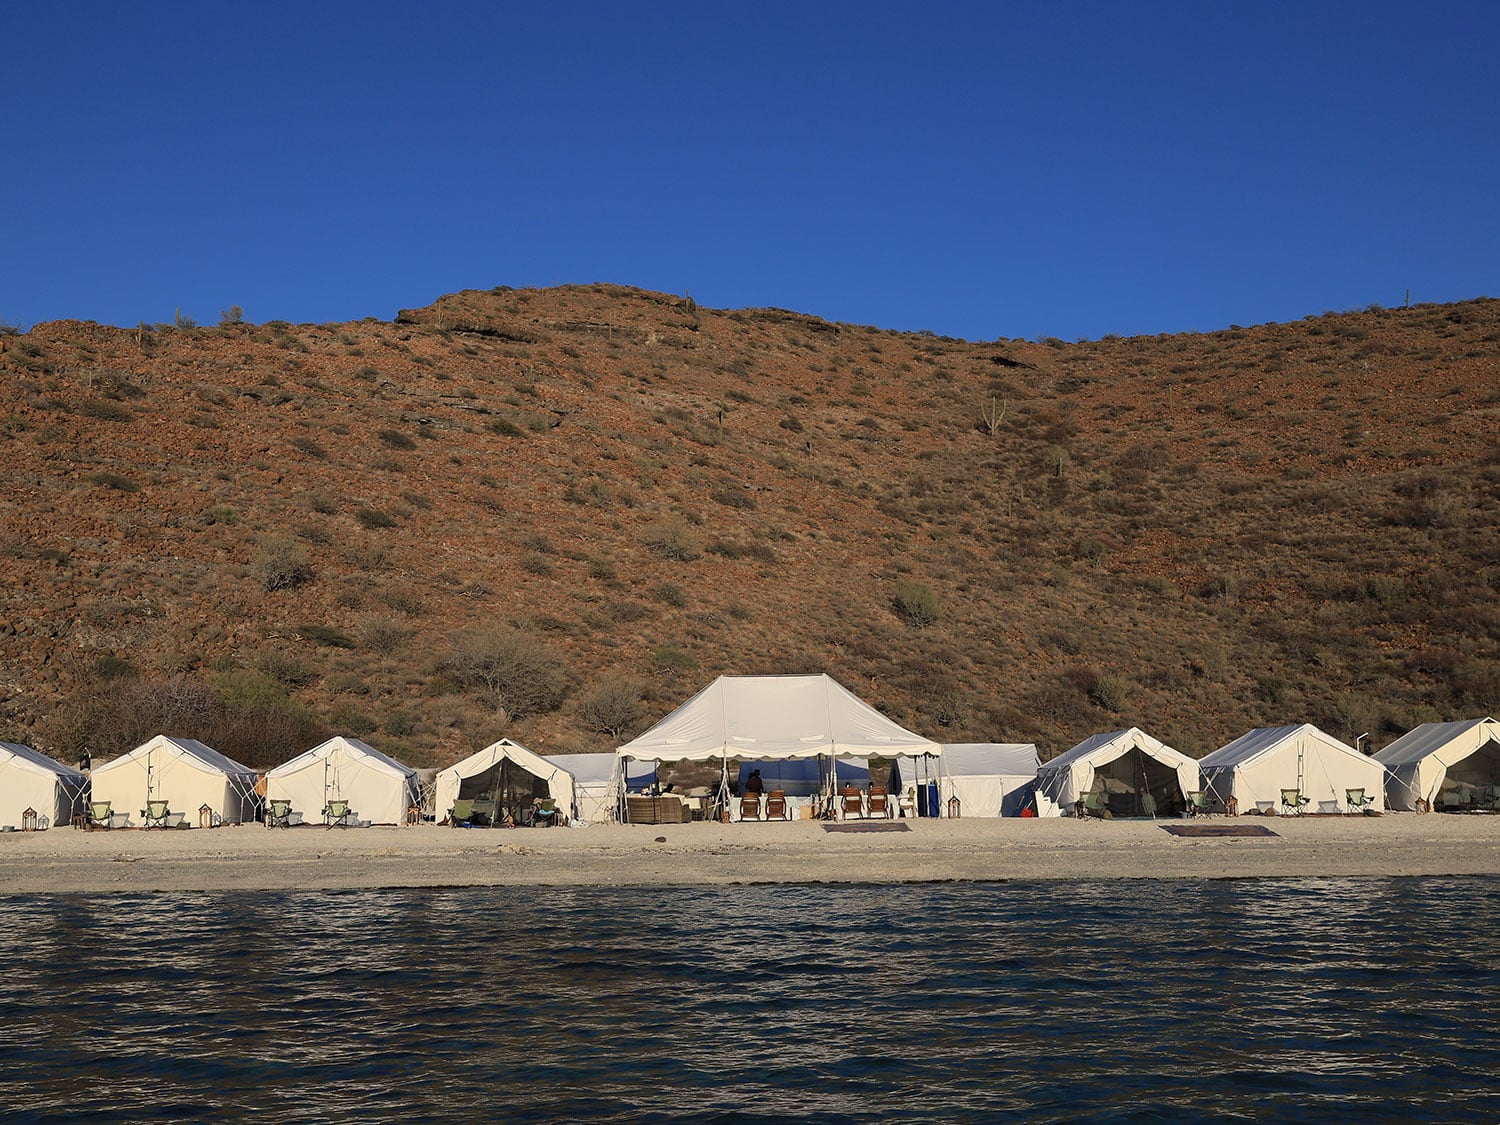 A lineup of tents on a beach.